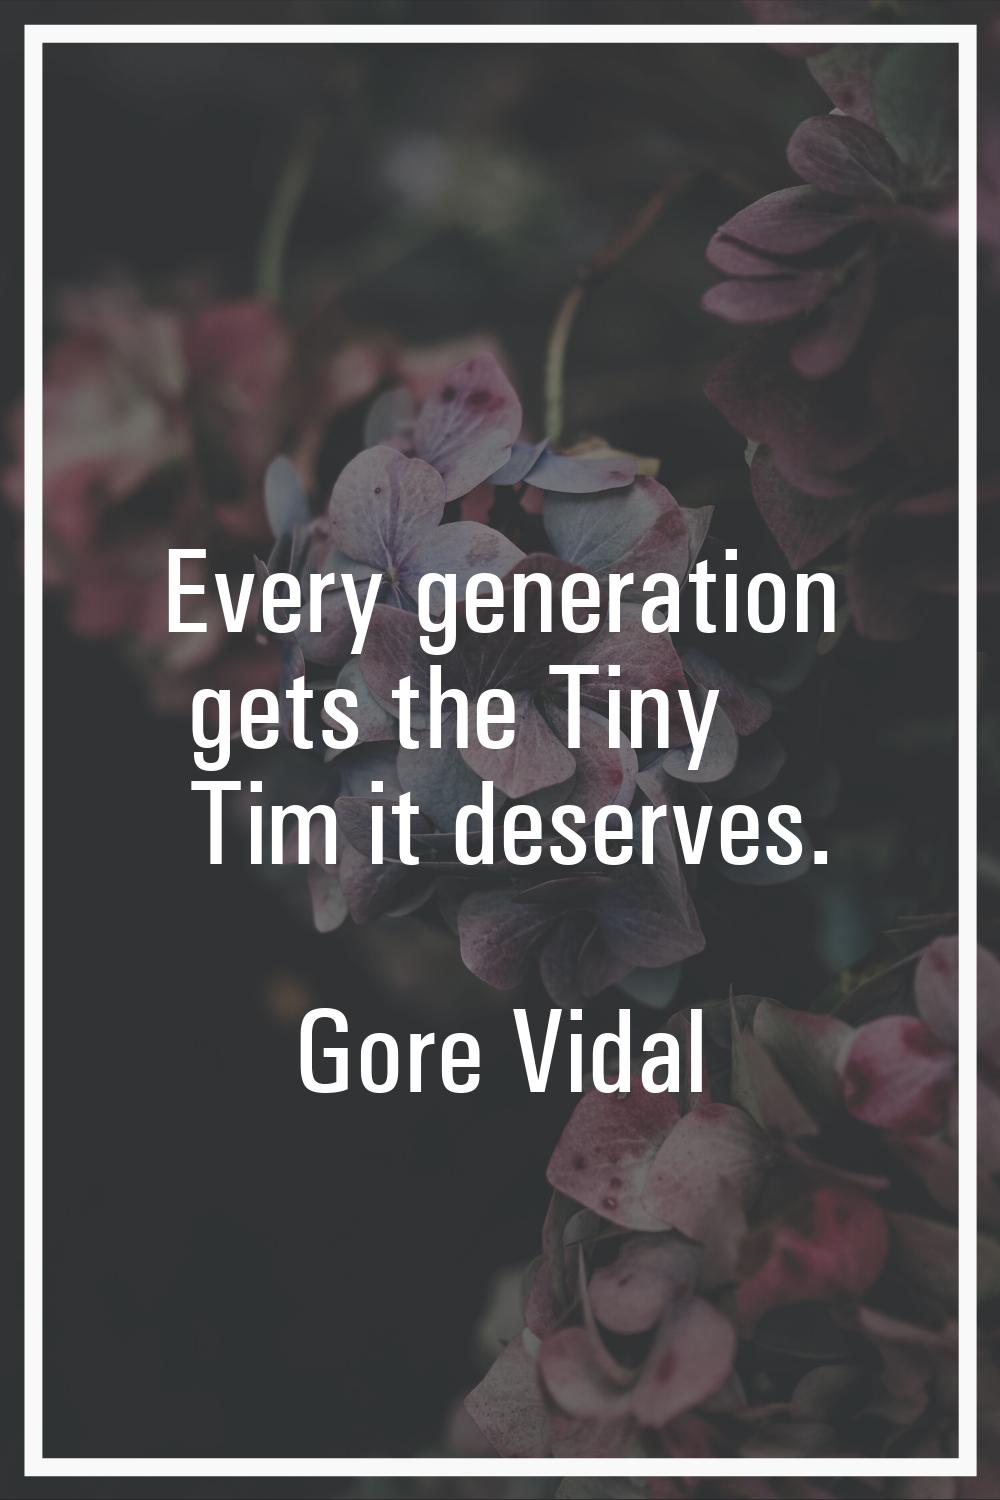 Every generation gets the Tiny Tim it deserves.